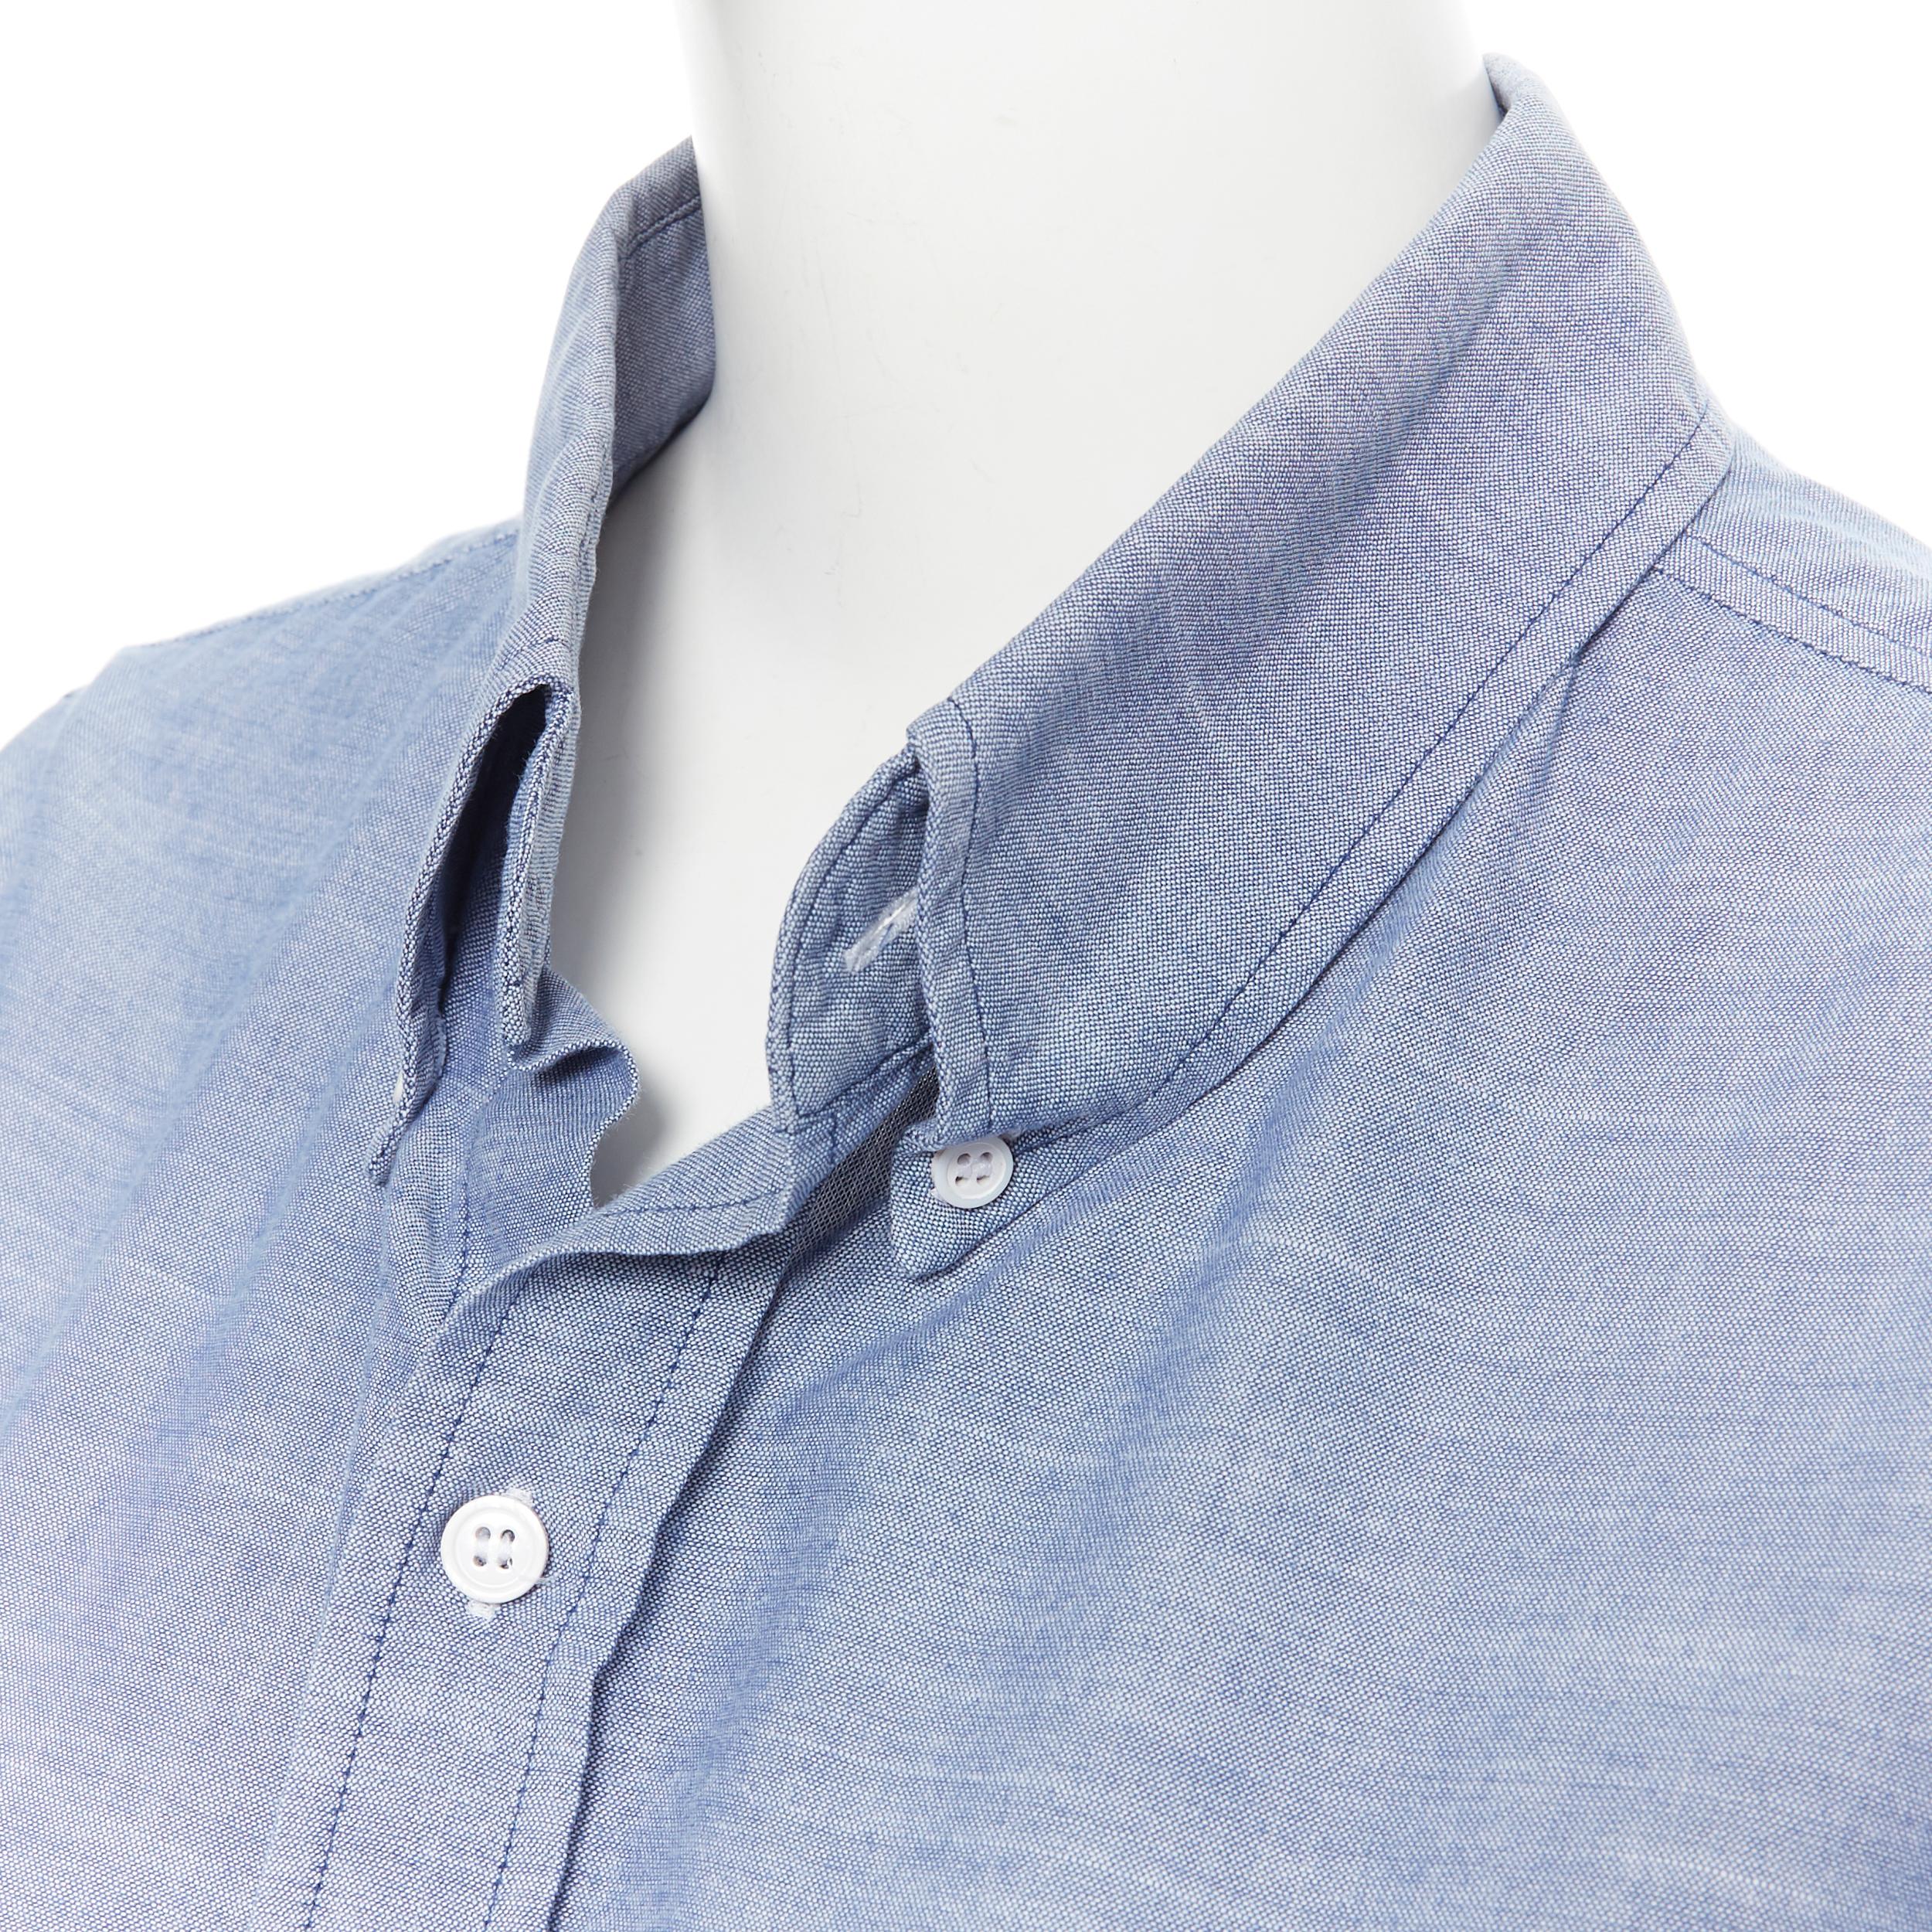 BAND OF OUTSIDER 100% cotton blue chambray curved hem casual shirt Size 3
Brand: Band of Outsider
Model Name / Style: Casual shirt
Material: Cotton
Color: Blue
Pattern: Solid
Closure: Button
Extra Detail: Long Sleeve. Collared neckline. Spread